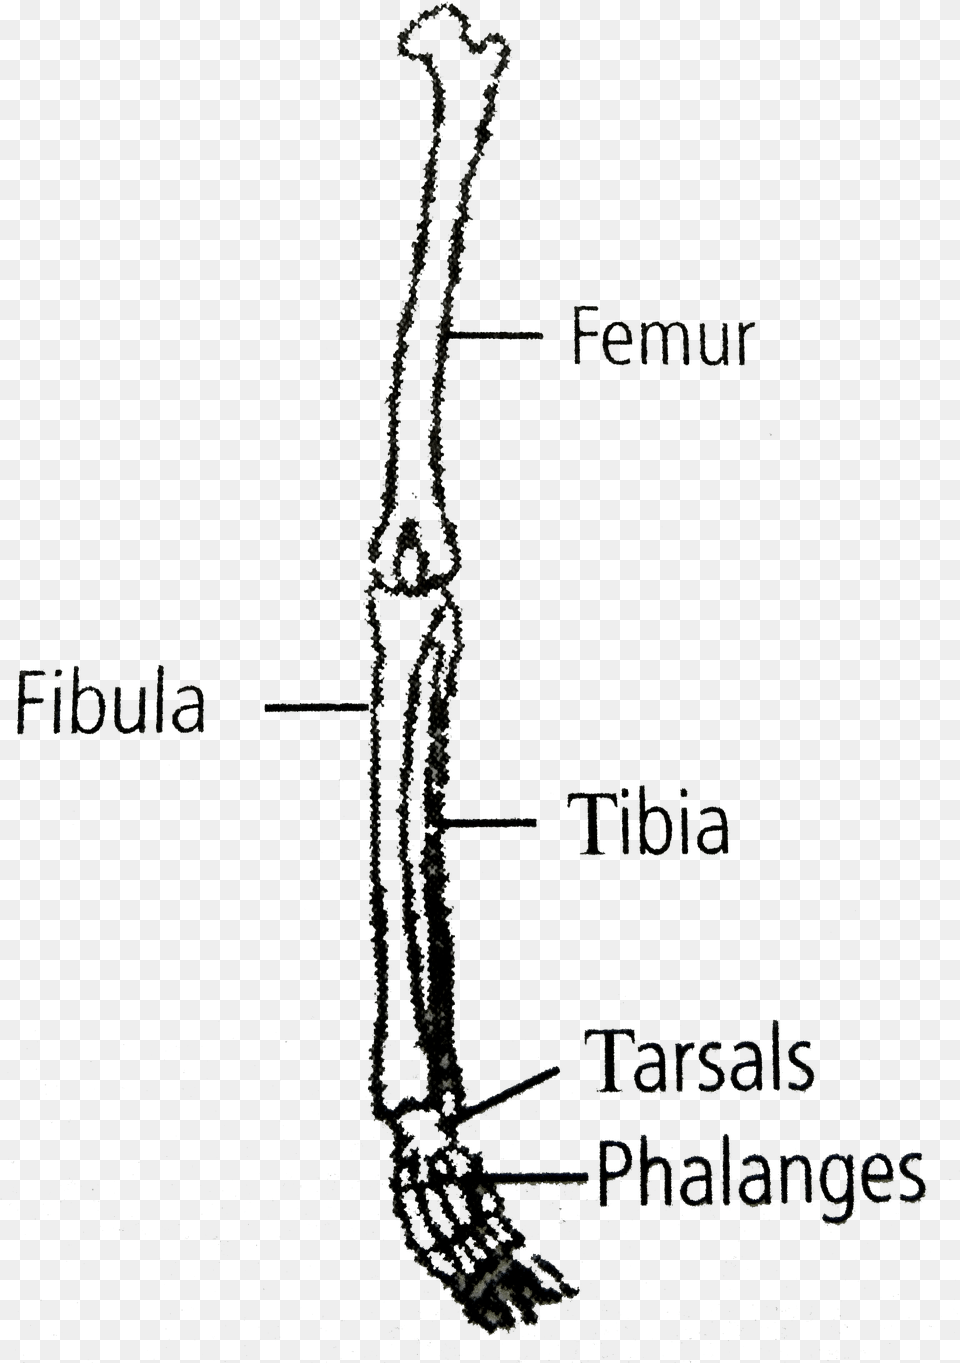 Diagram Of Hind Limb Of Human, Cutlery Free Png Download